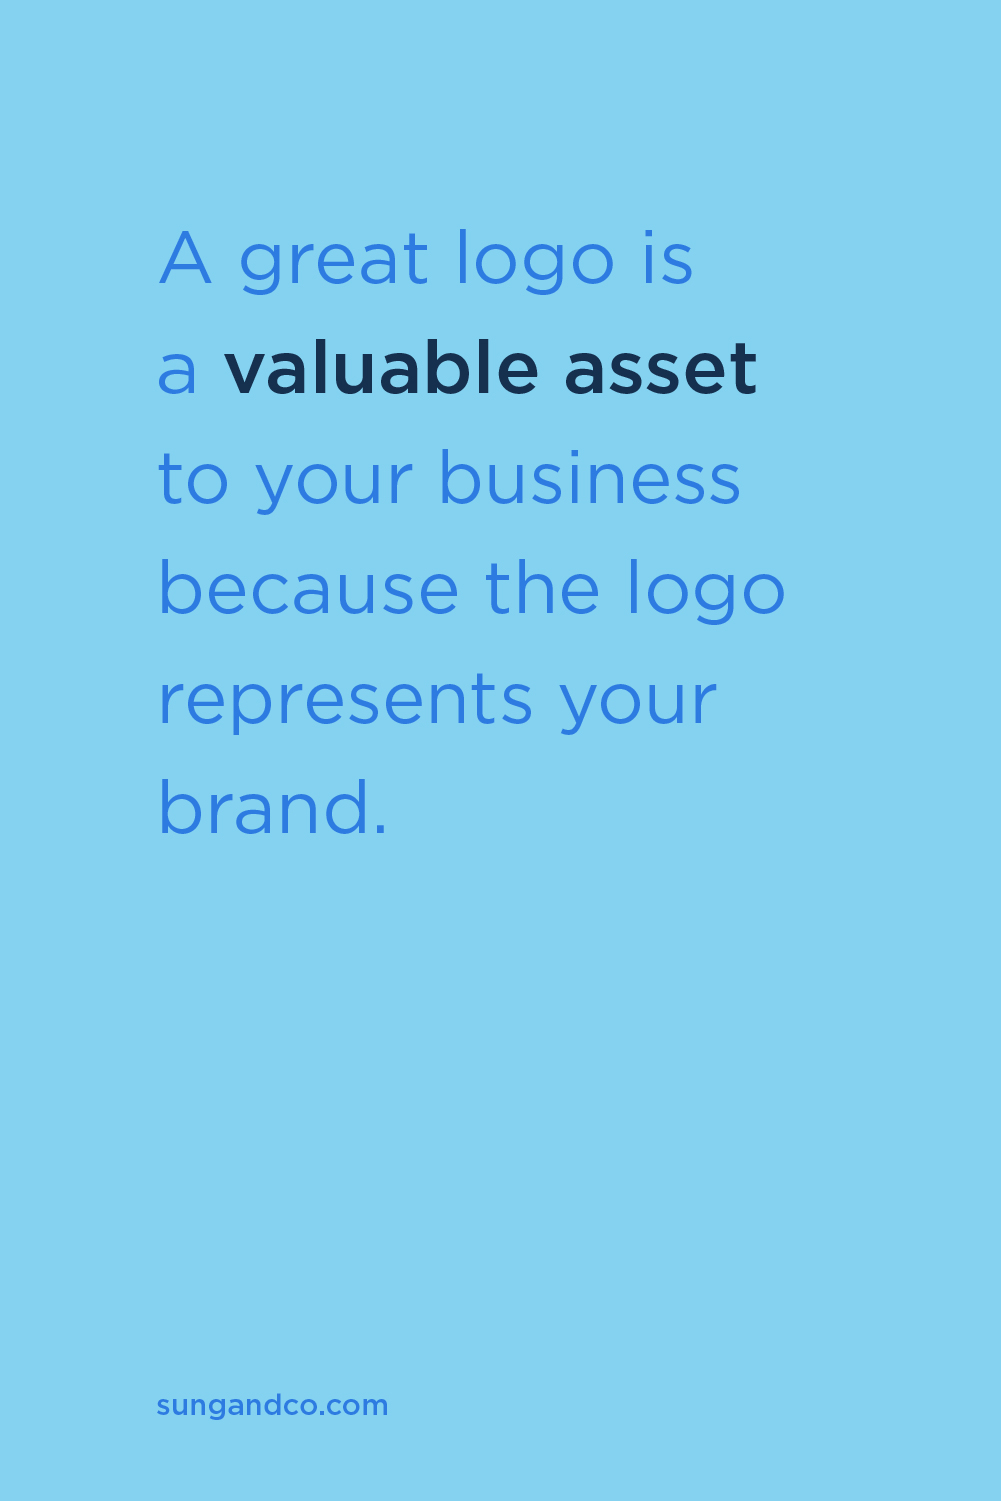 "A great logo is a valuable asset to your business because the logo represents your brand." - Sung and Co